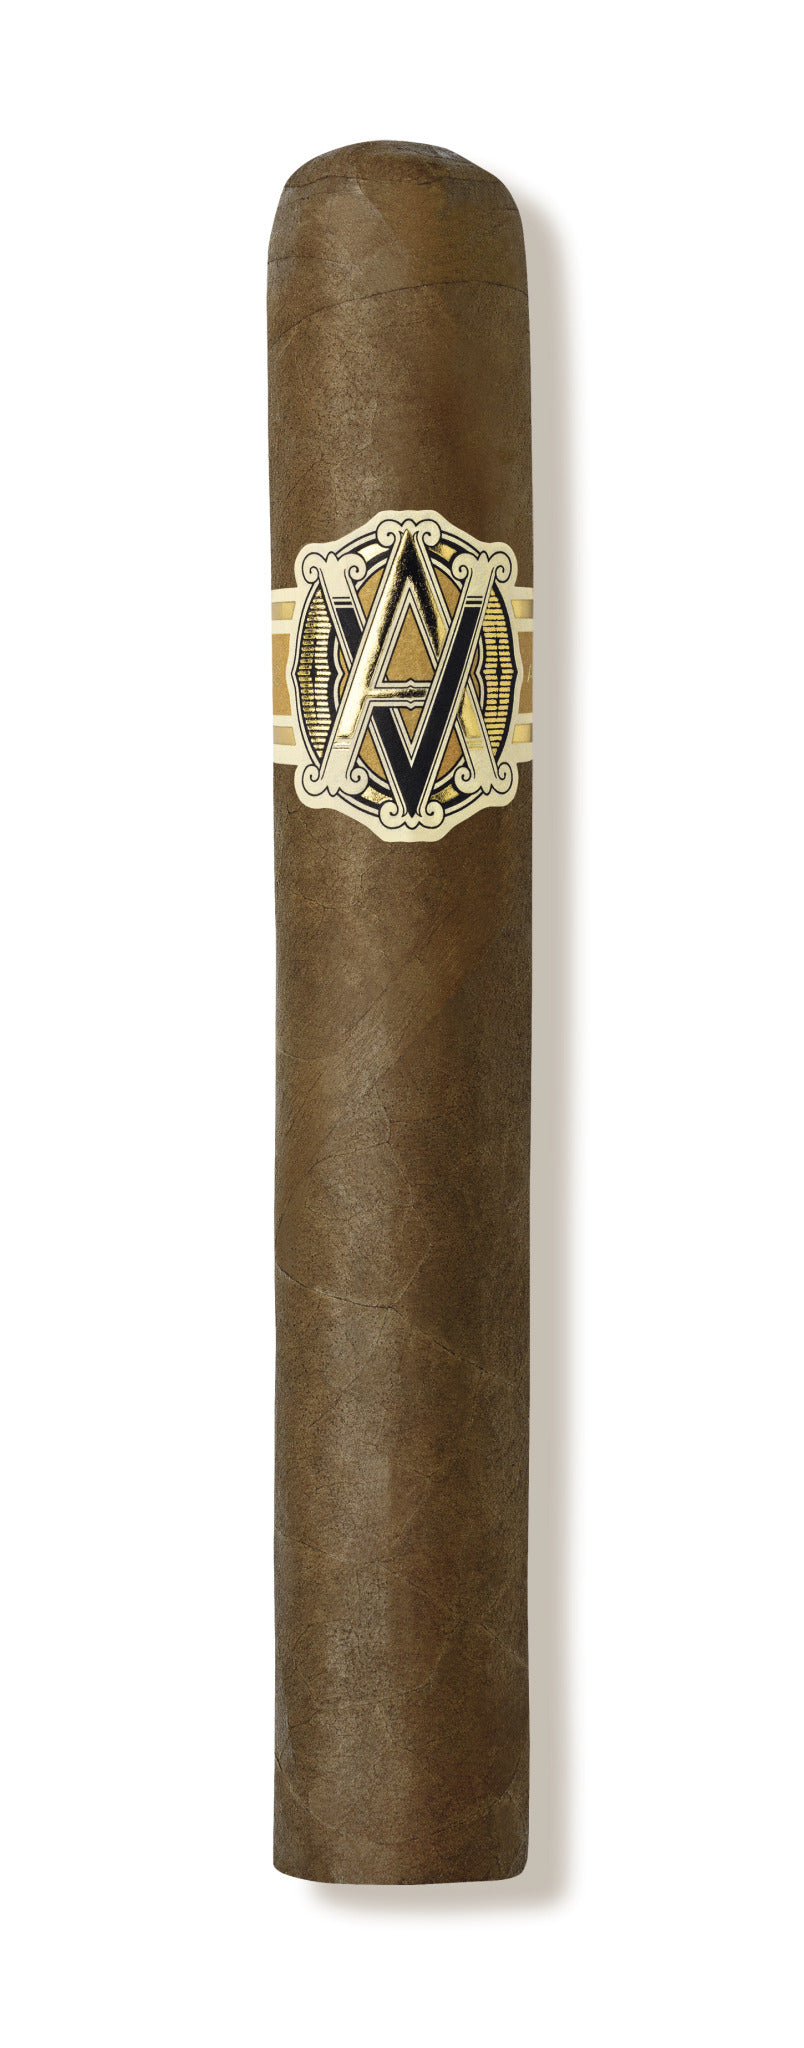 Avo Cigars Classic No.9 Featured Image